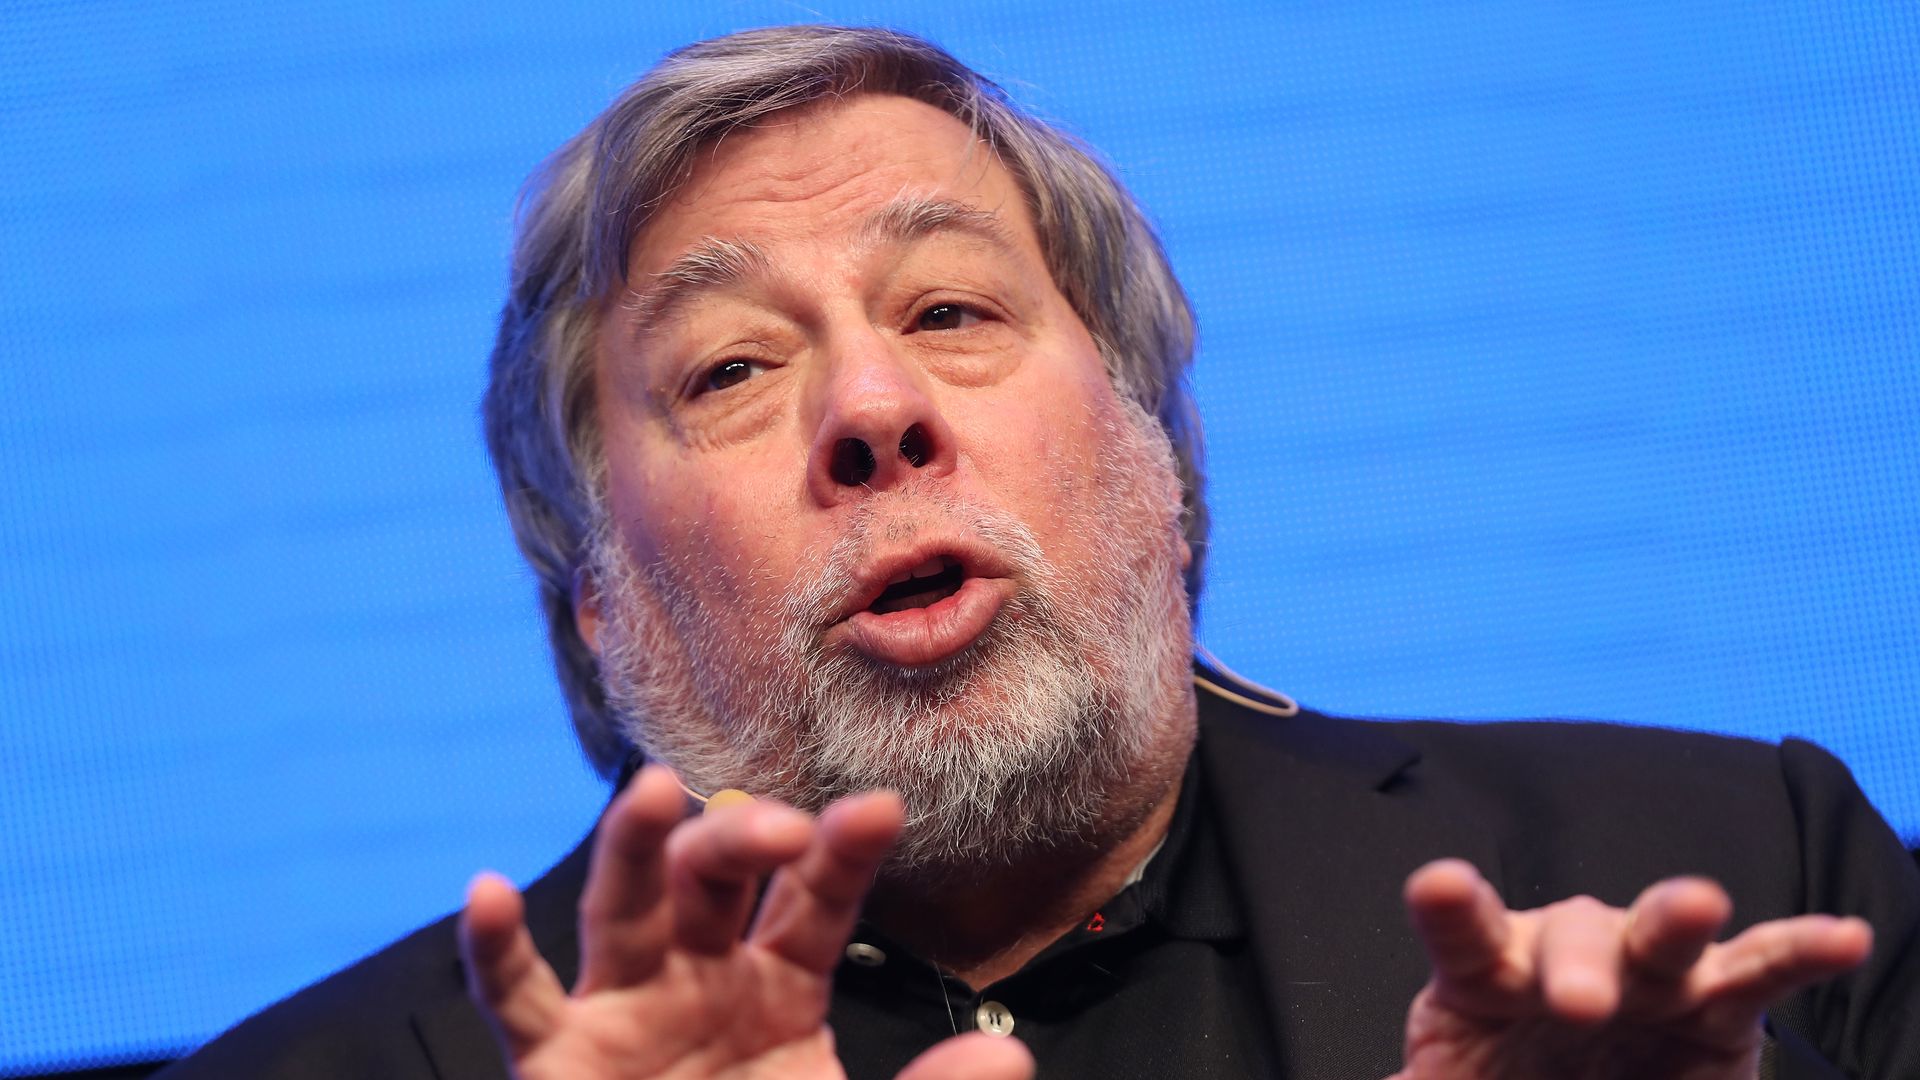 Apple co-founder Steve Wozniak at a conference.